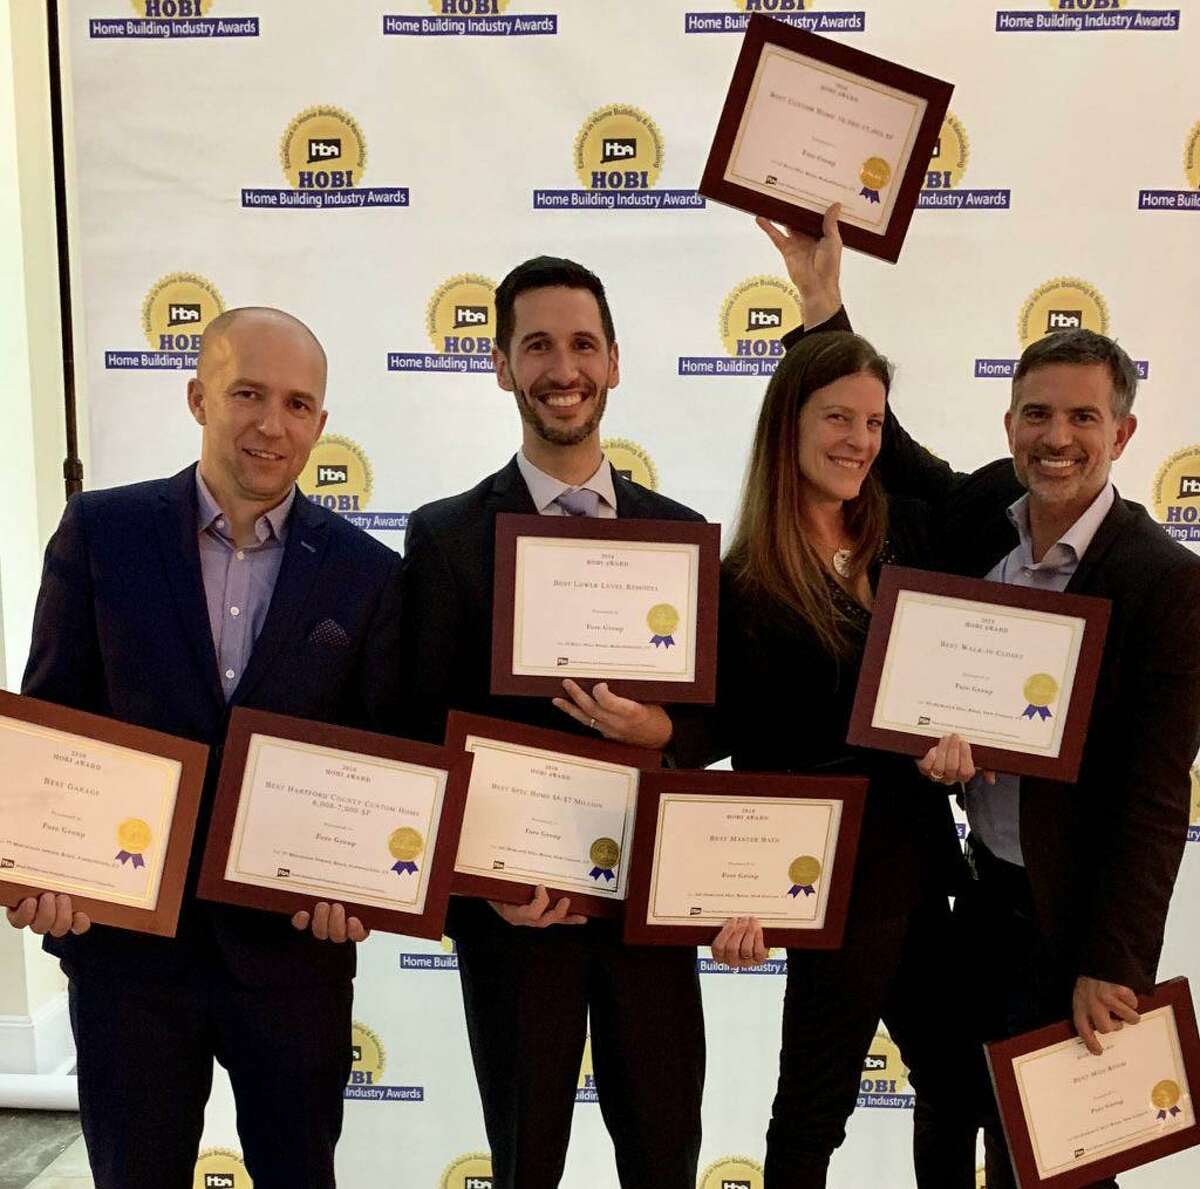 The Fore Group, the company Fotis Dulos owns, earned eight awards from the Home Builders Association of Connecticut in 2018. Fotis Dulos is on the right, with Michelle Troconis.